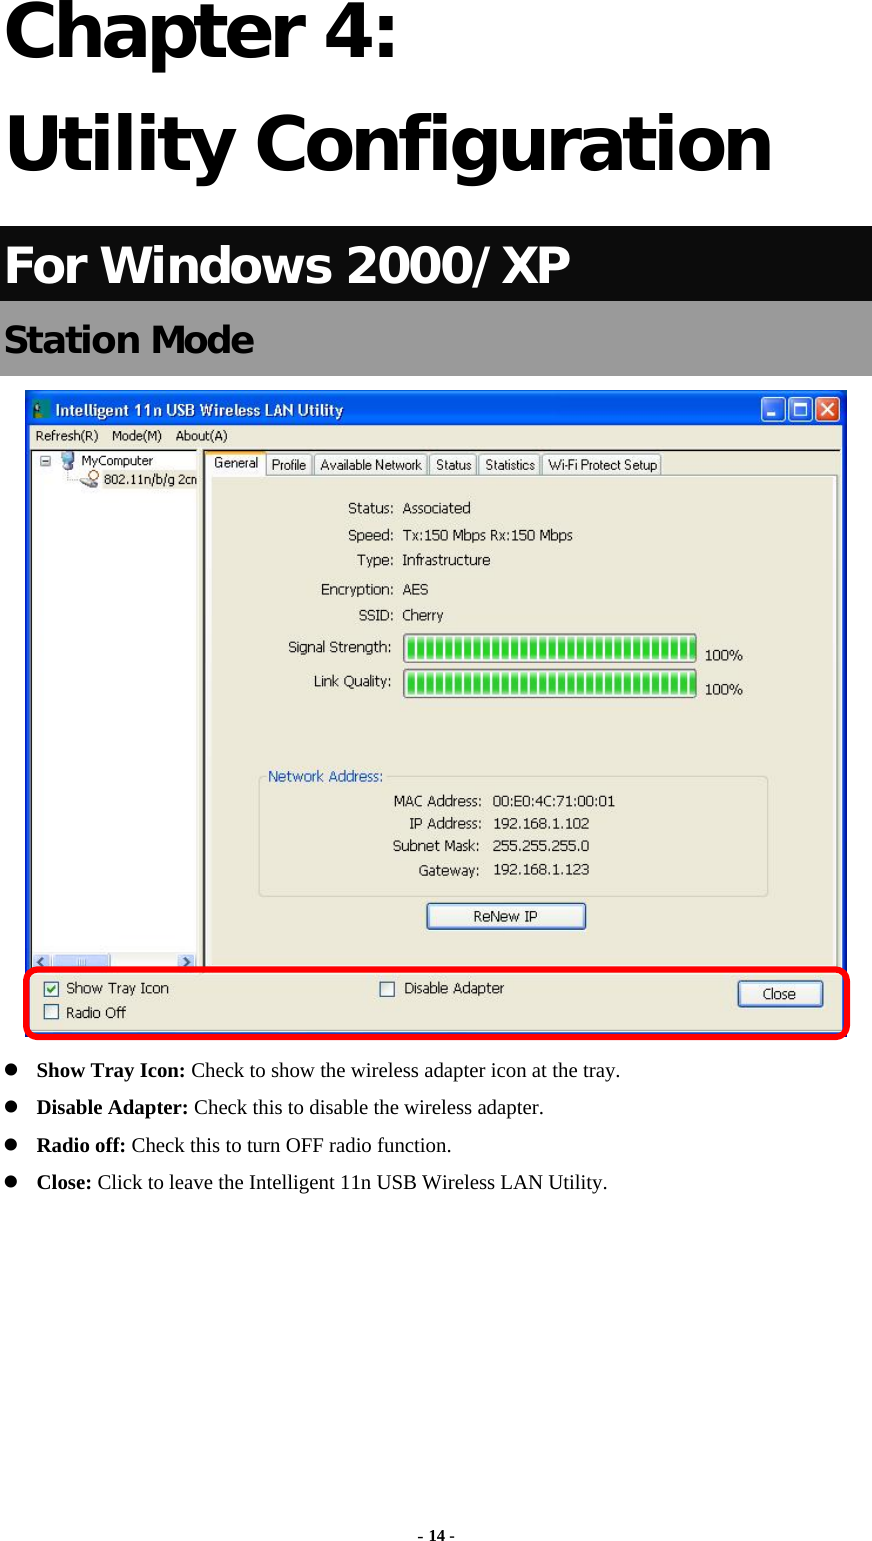  - 14 - Chapter 4: Utility Configuration For Windows 2000/XP Station Mode   Show Tray Icon: Check to show the wireless adapter icon at the tray.  Disable Adapter: Check this to disable the wireless adapter.  Radio off: Check this to turn OFF radio function.  Close: Click to leave the Intelligent 11n USB Wireless LAN Utility.       